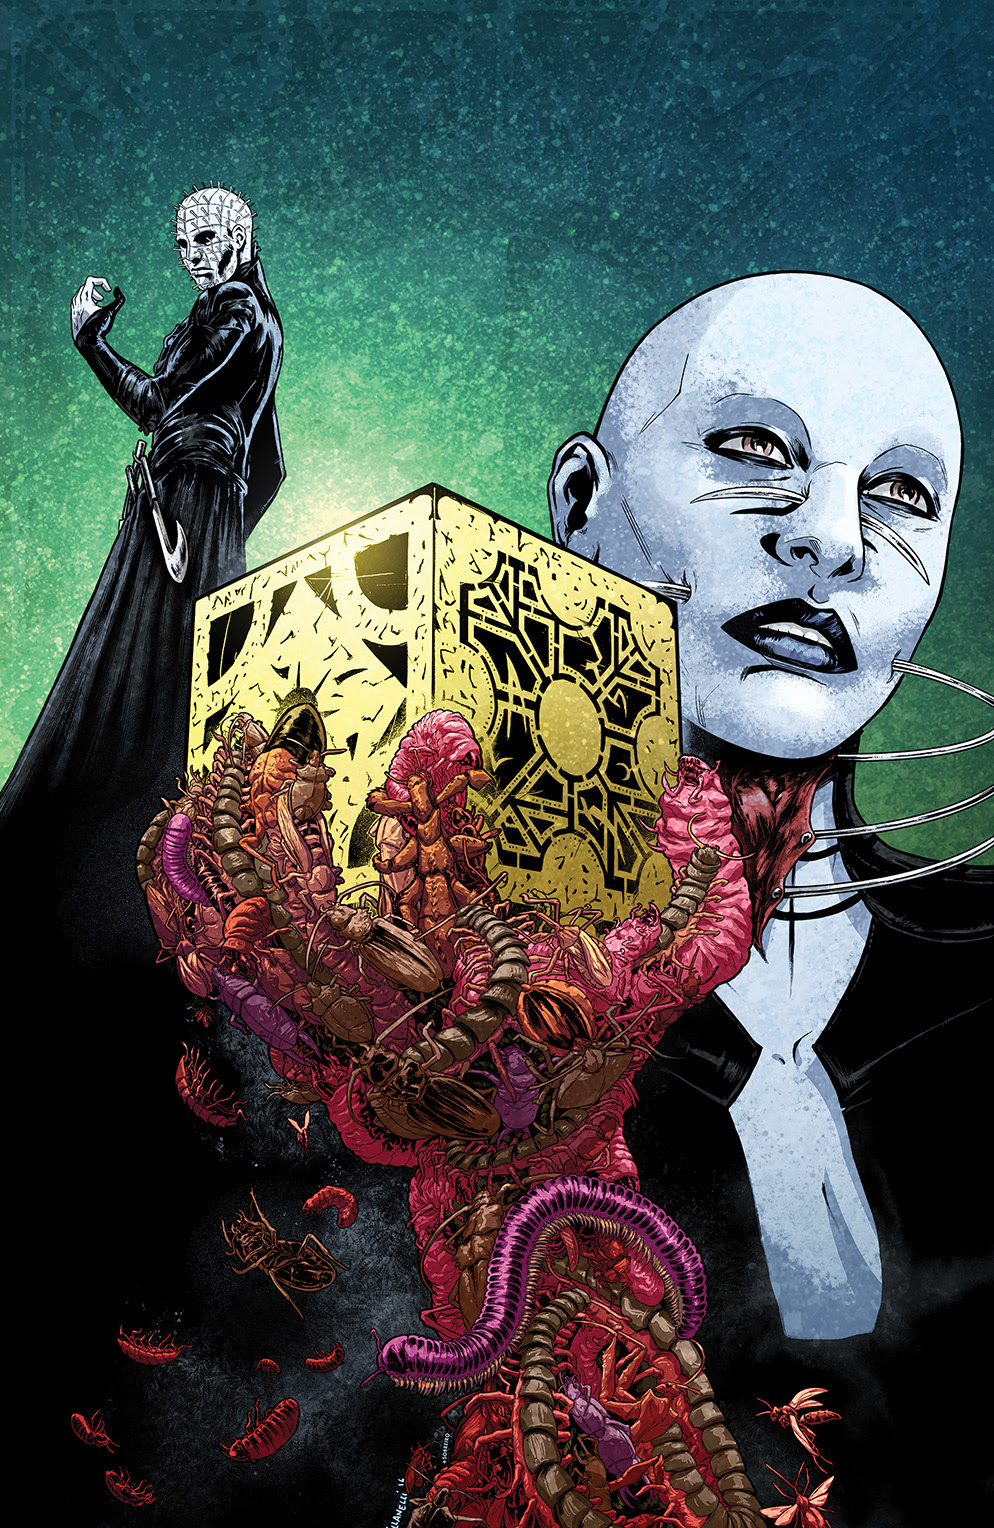 CLIVE BARKER'S HELLRAISER: BESTIARY #5 Cover B by Paolo Villanelli